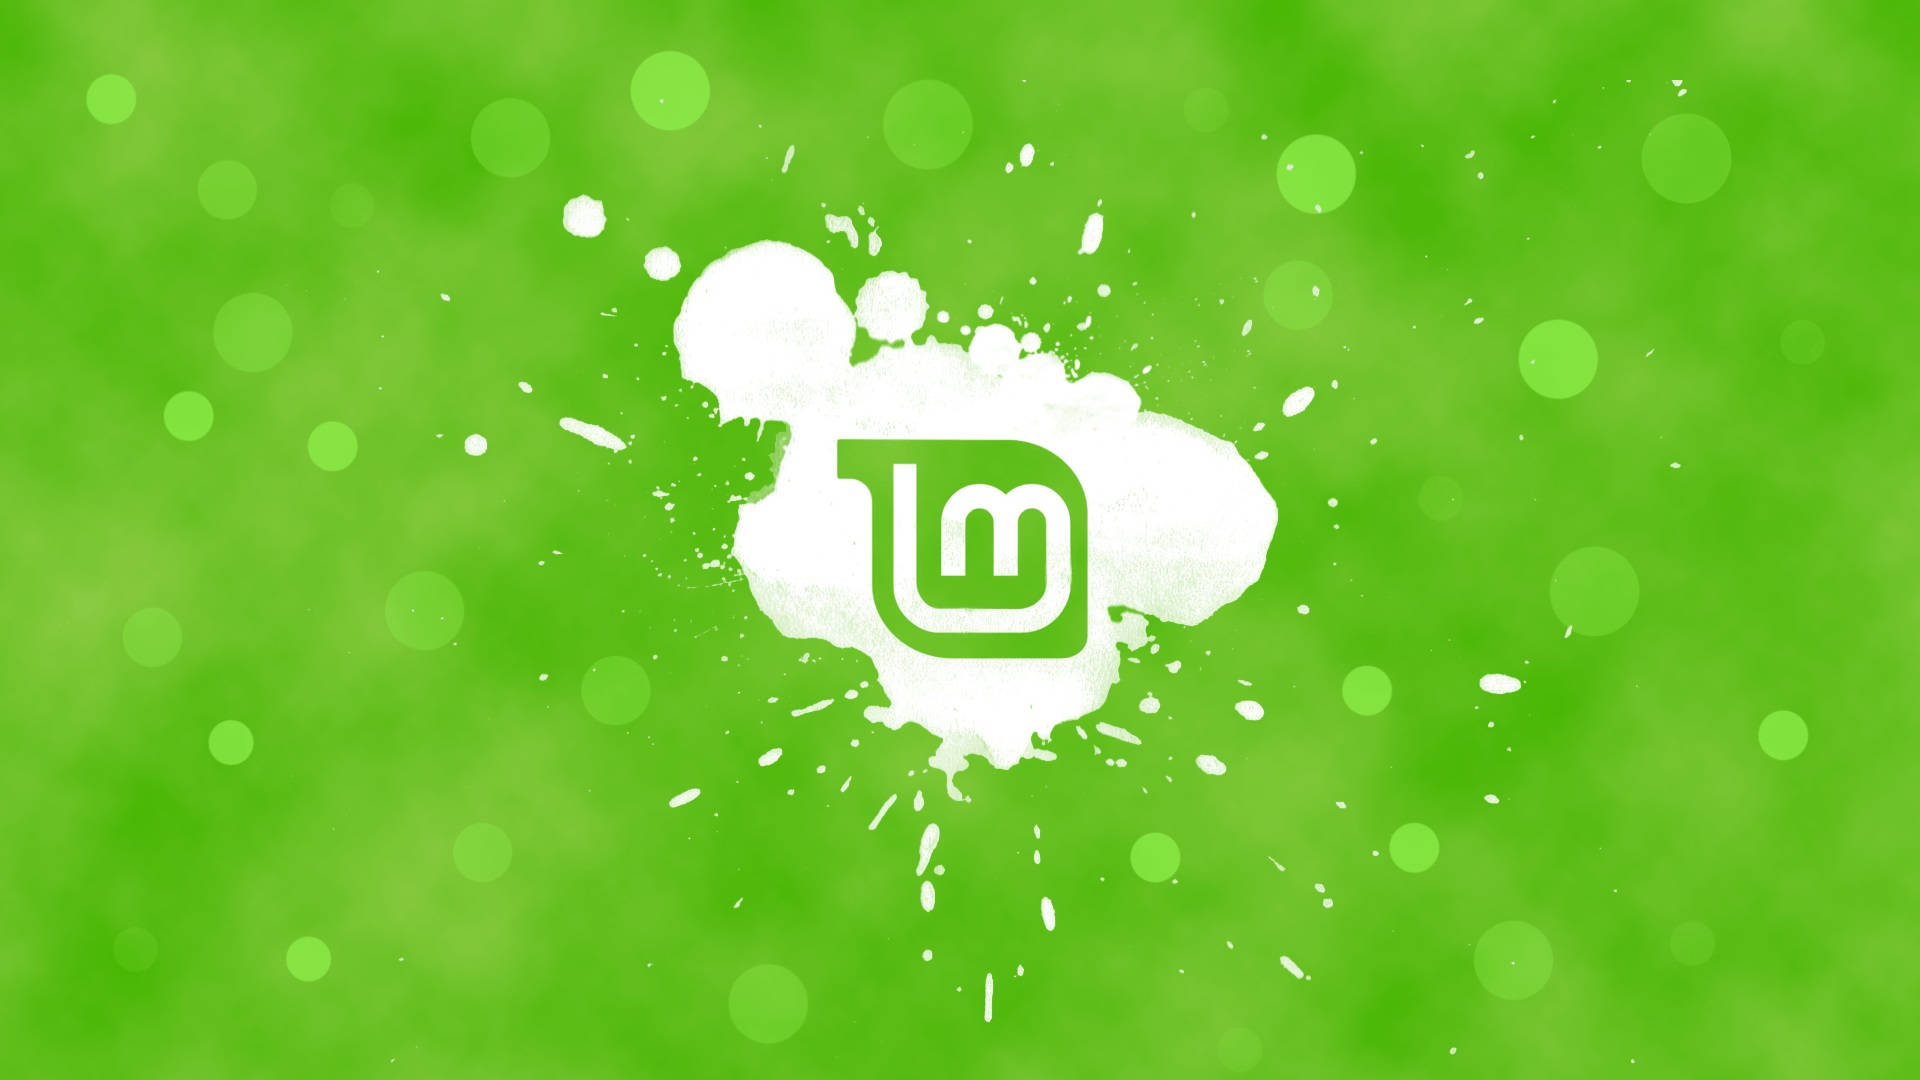 Operating System Linux Mint Green Themed Logo